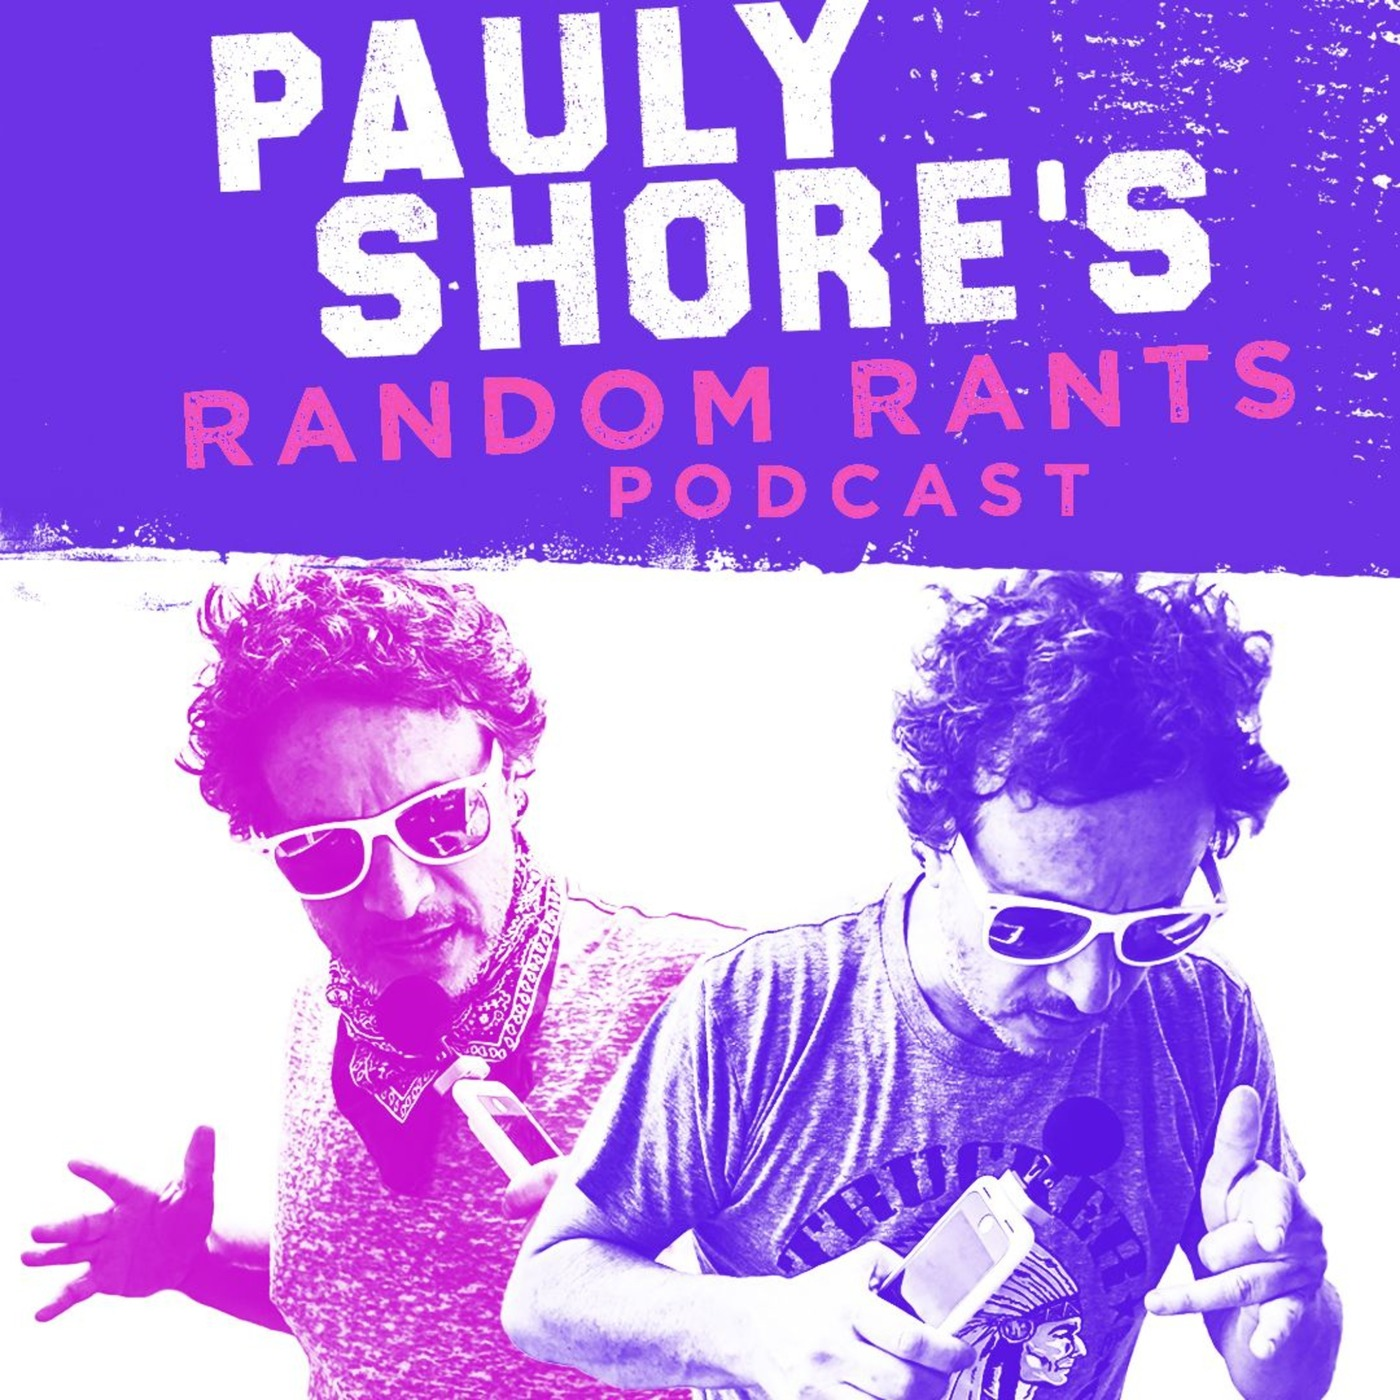 "Ranting with Celebrity Guest Star Larry David" - Pauly Shore's Random Rants 107